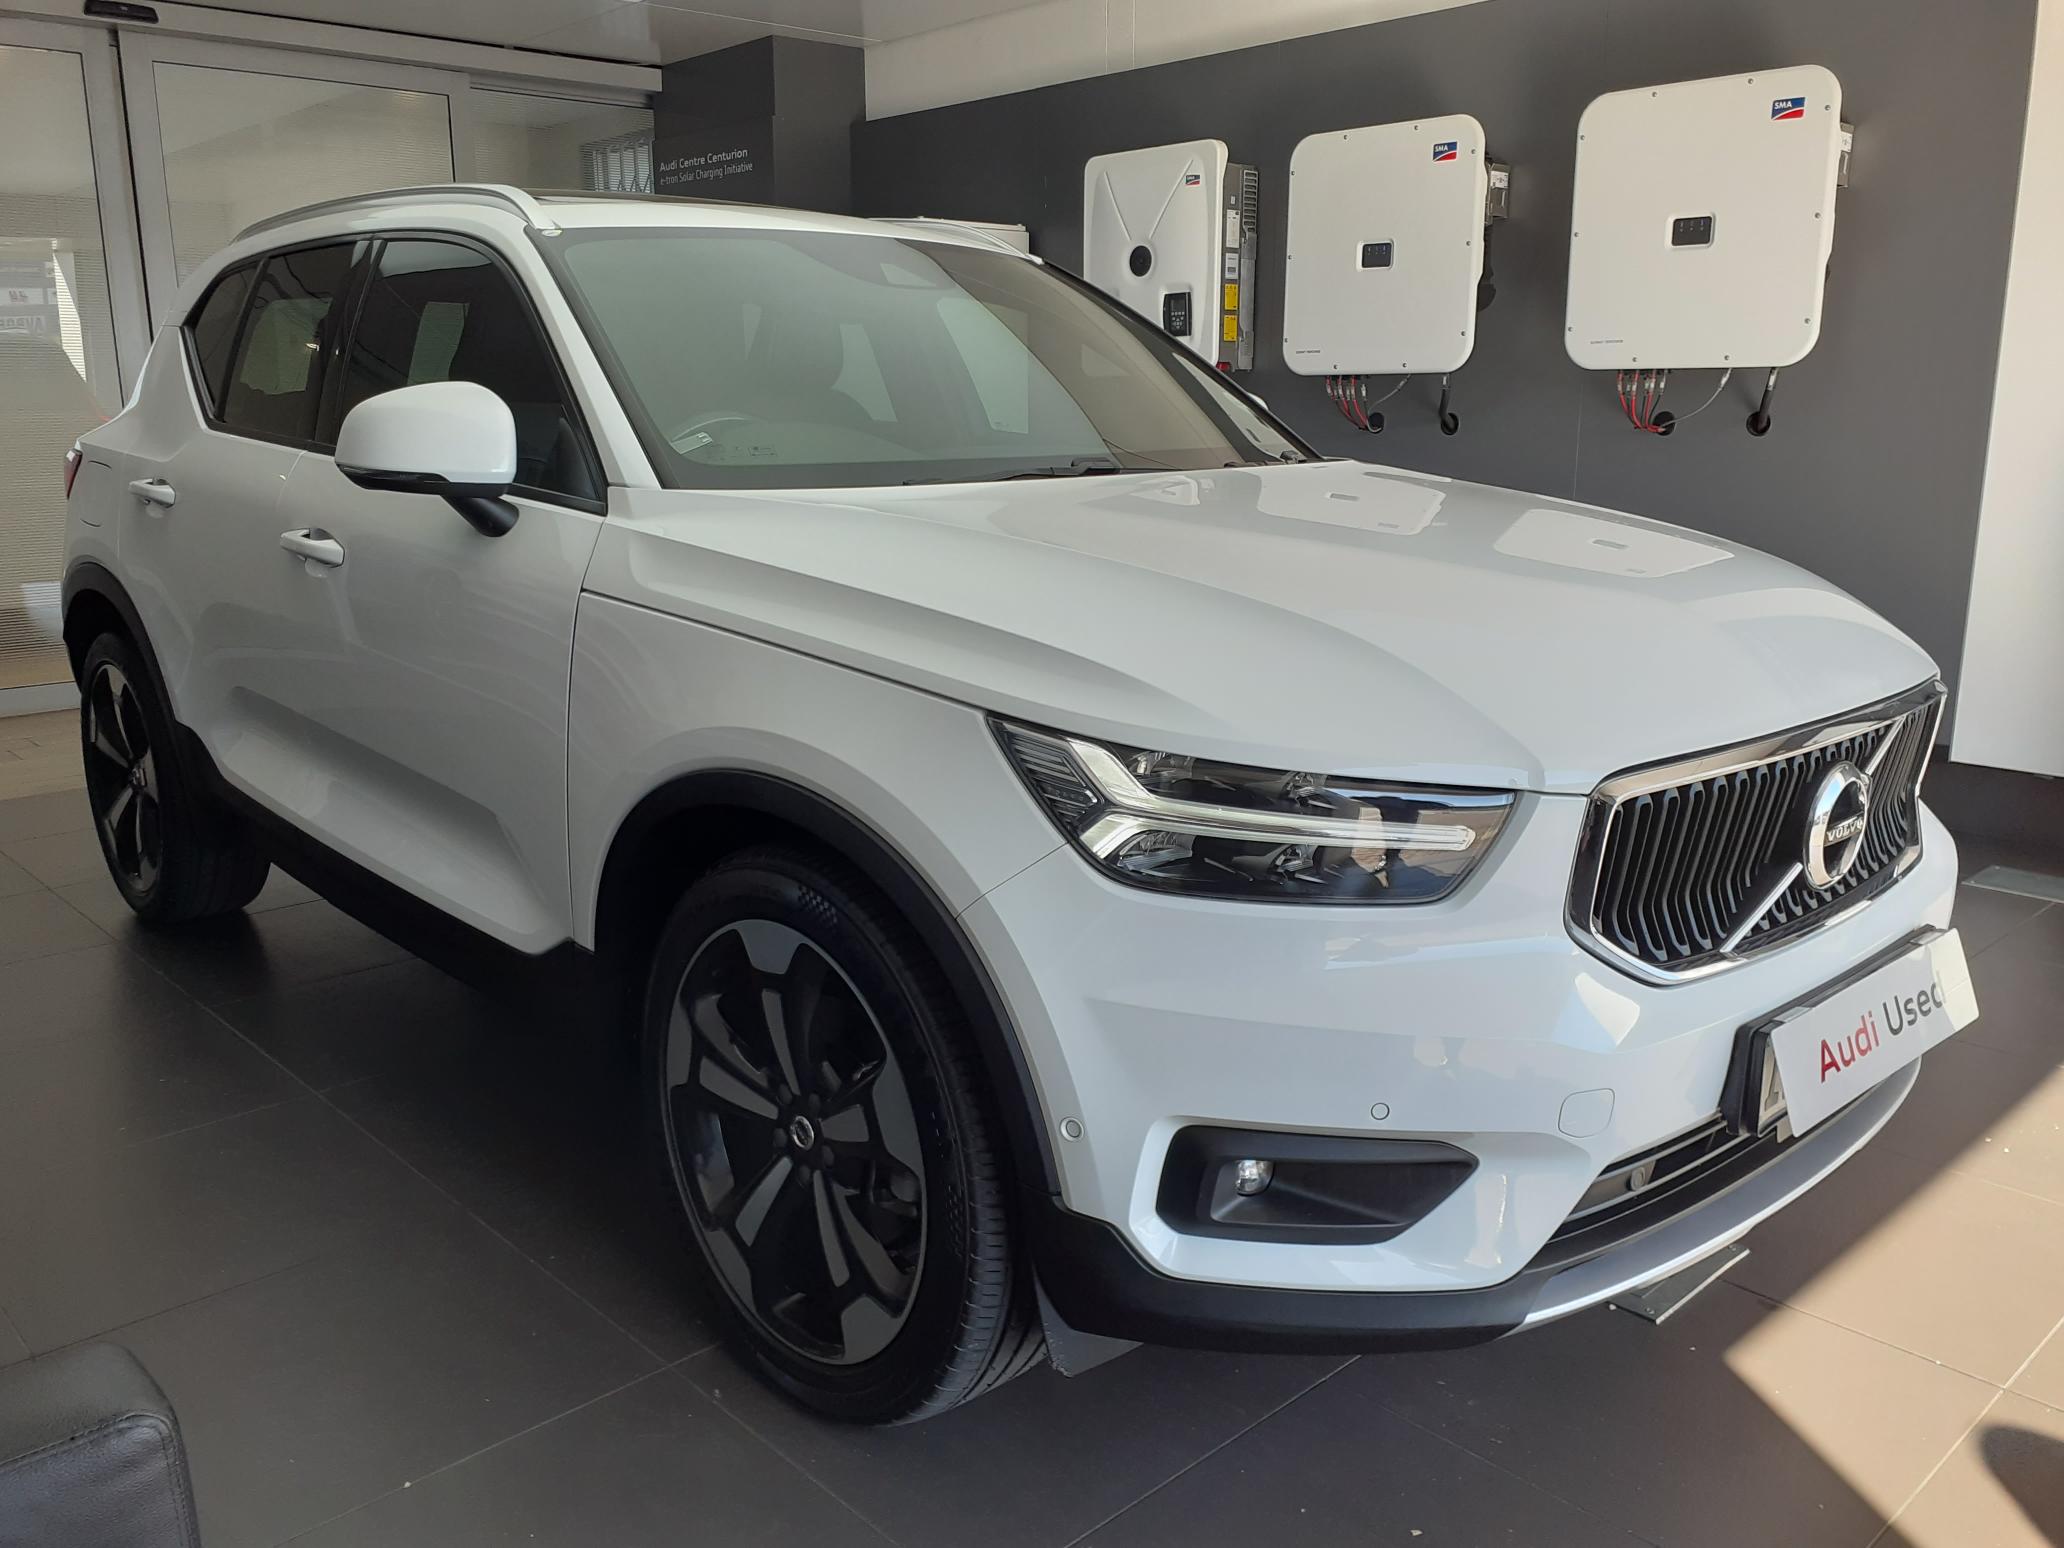 2019 Volvo XC40  for sale - 0489UNF090103